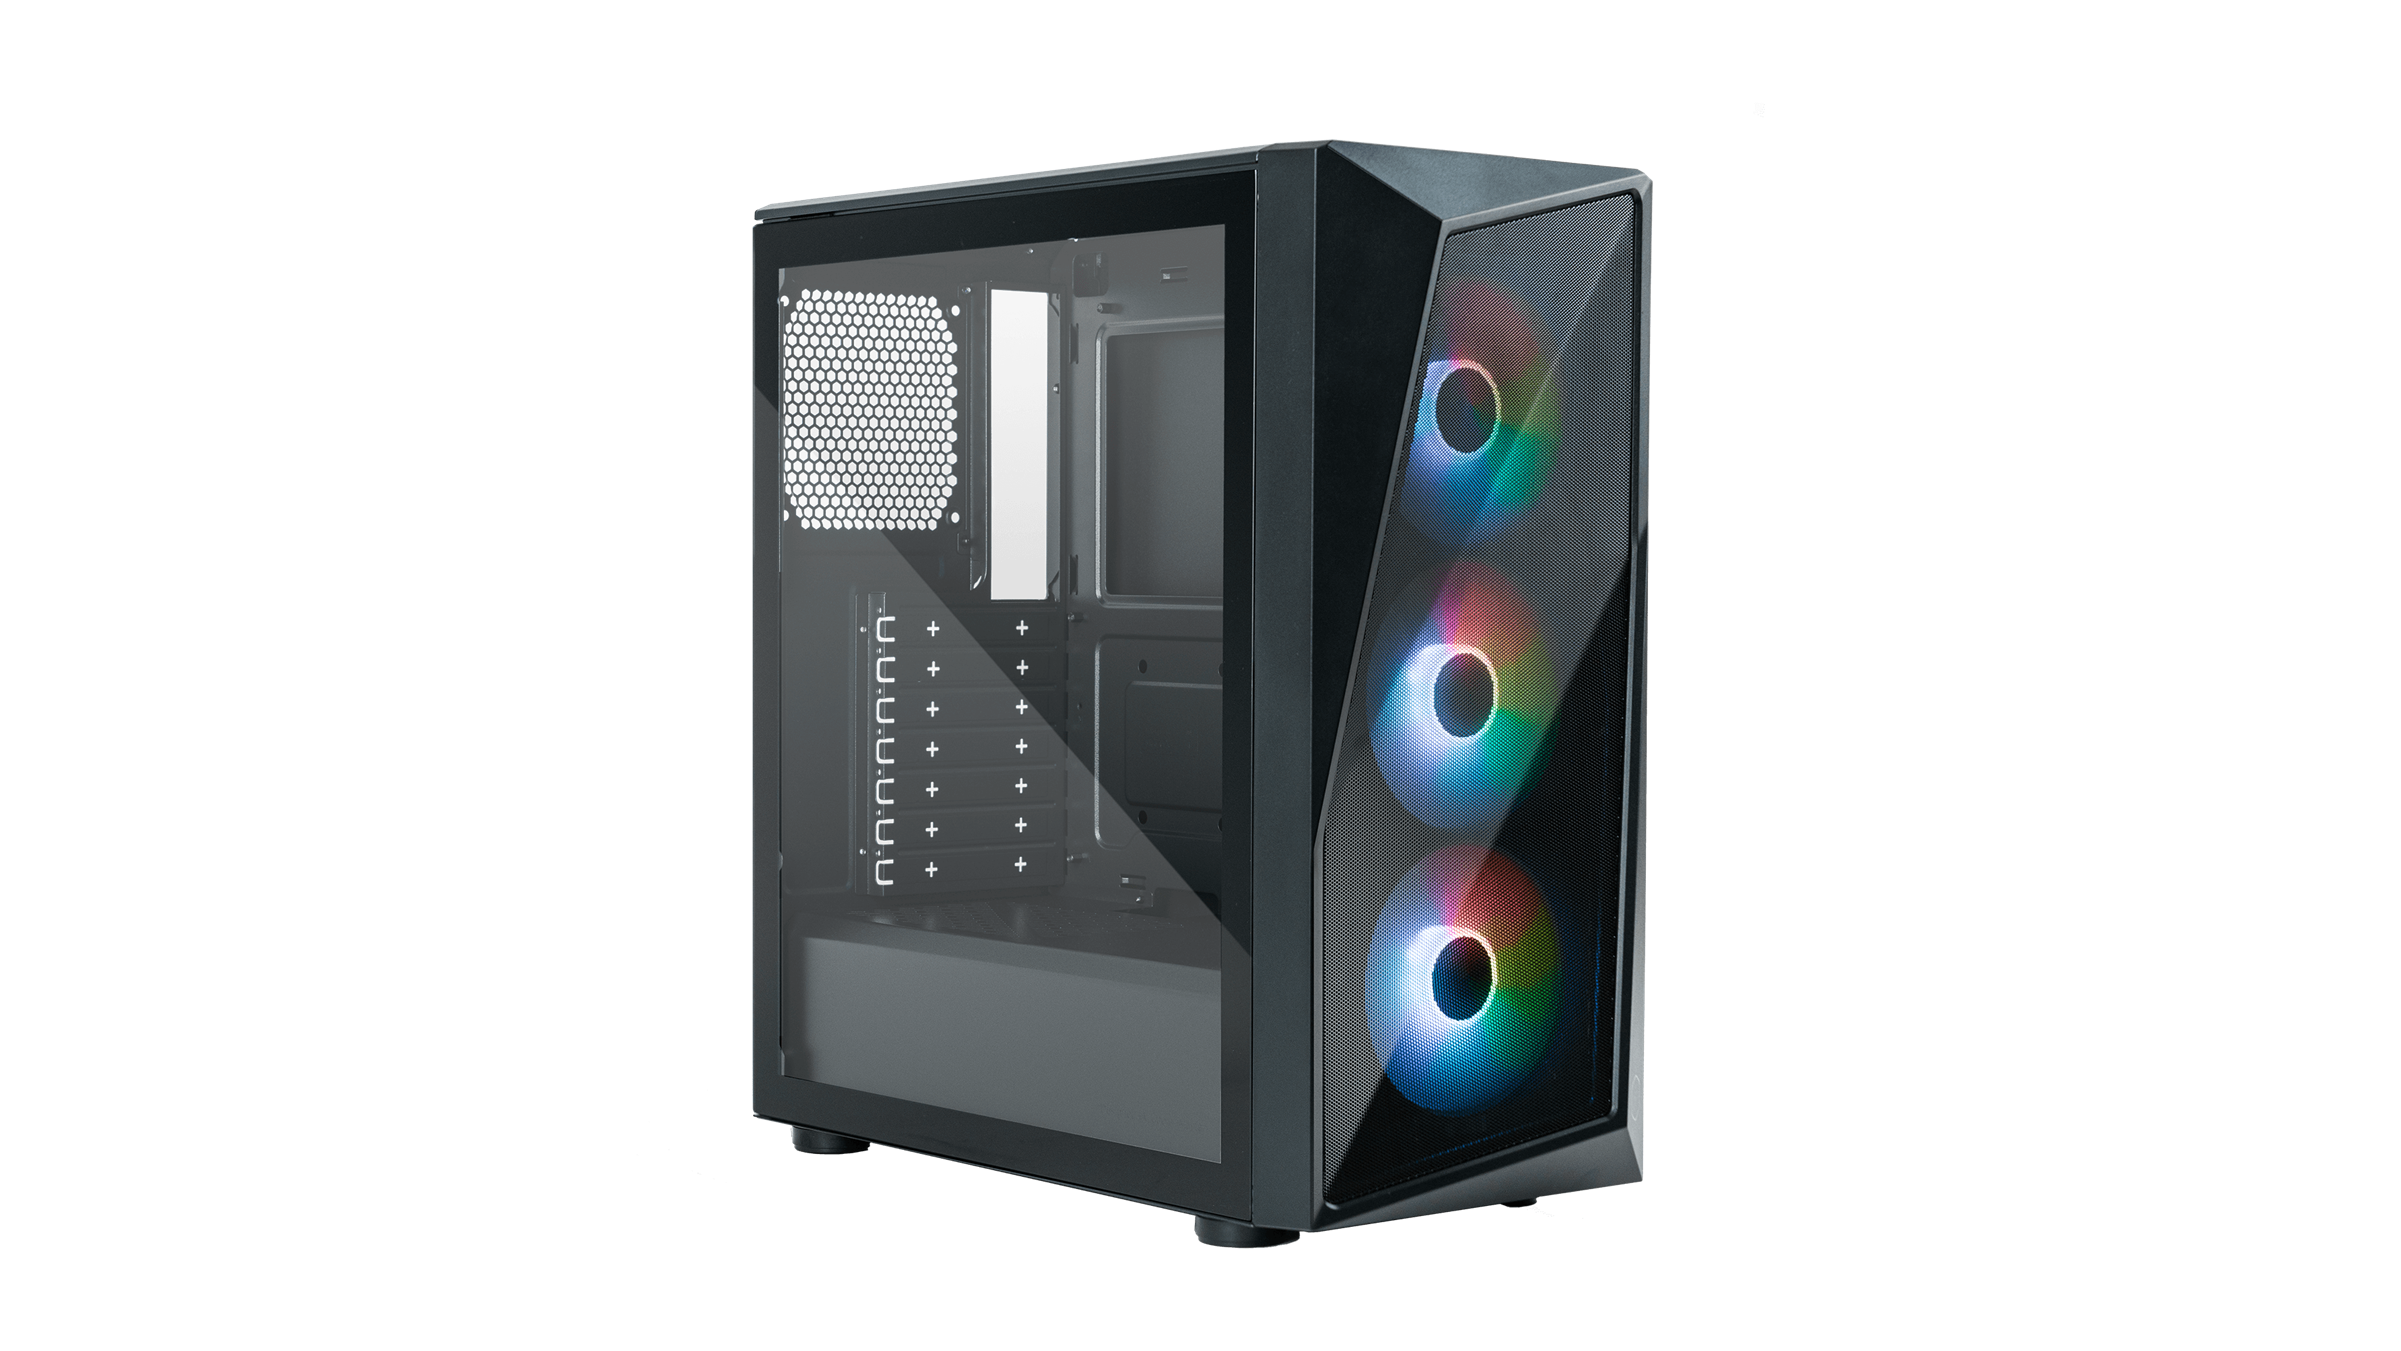 cooler-master-launches-airflow-focused-pc-cases-with-aggressive-front-ends